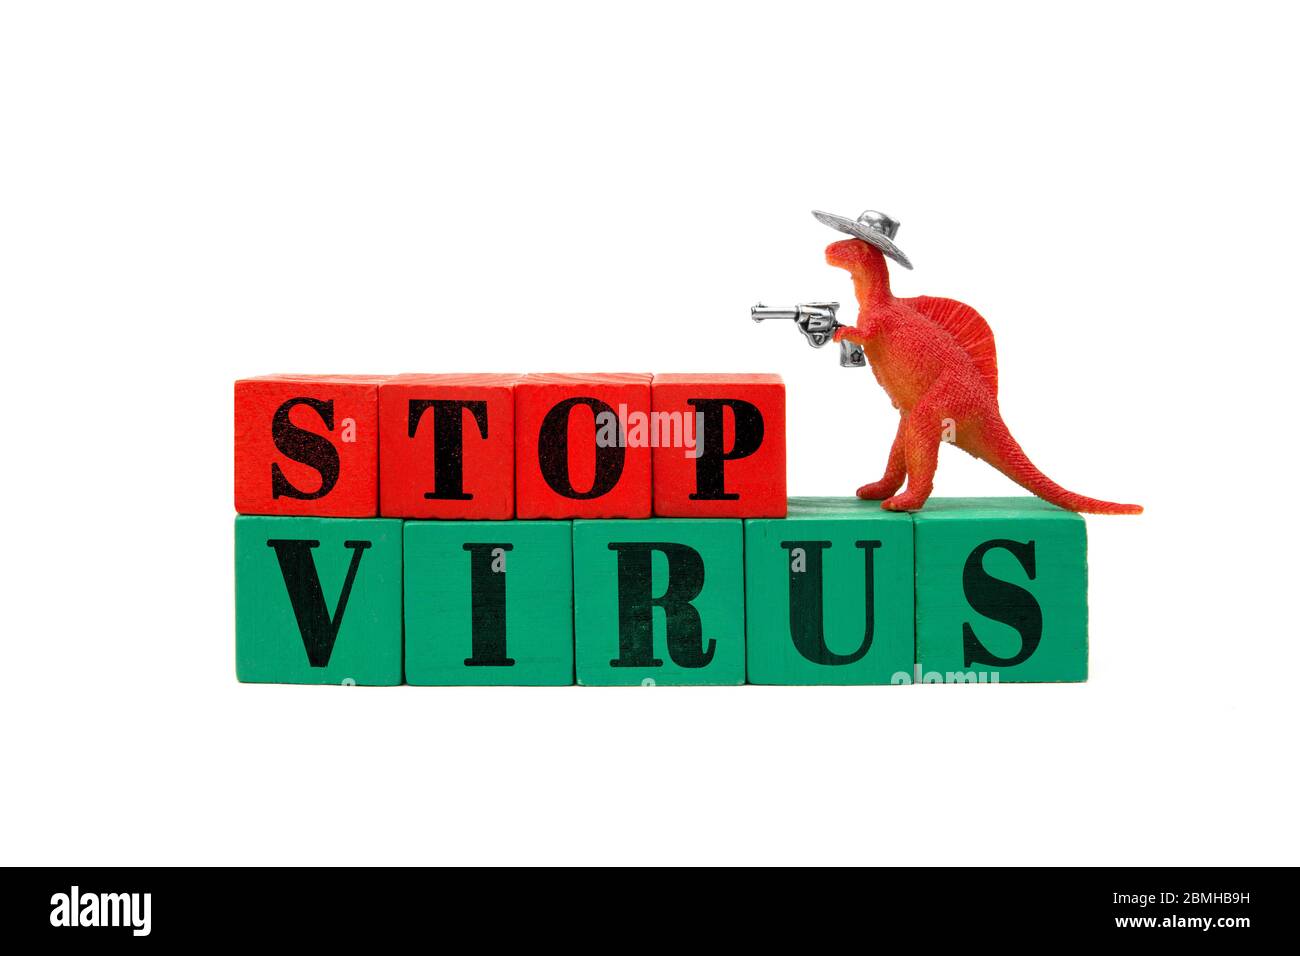 A small toy dinosaur wearing a cowboy hat and holding a revolver in his arm stands on a line of colored wooden blocks reading Stop Virus lettering. Stock Photo